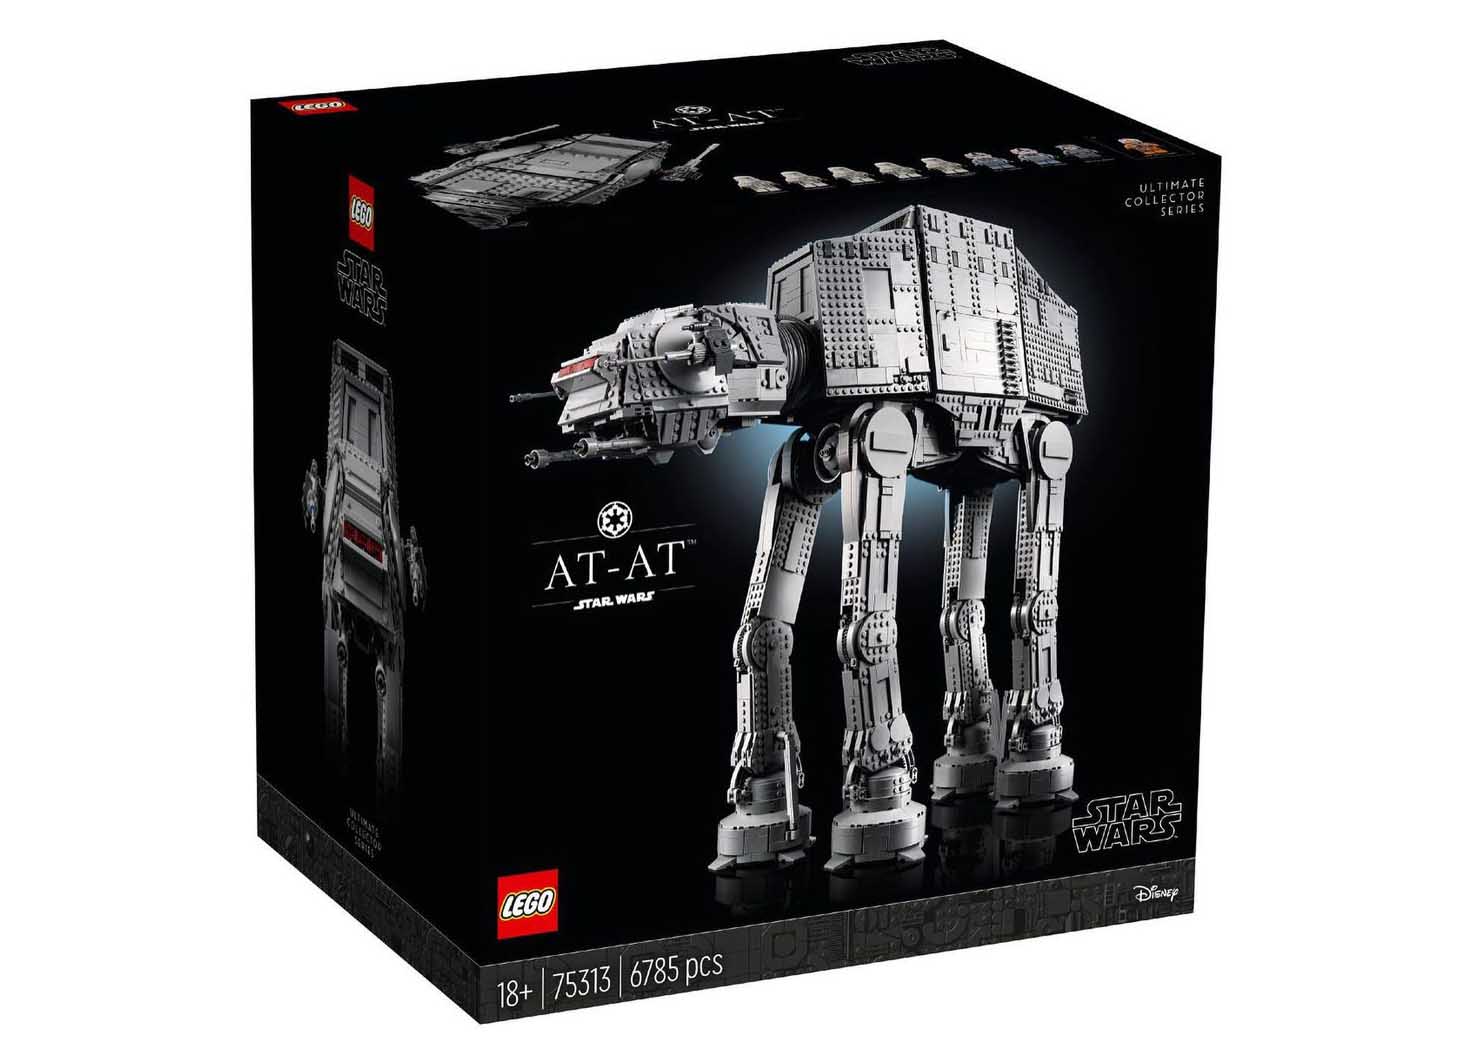 LEGO Star Wars Ultimate Collector Series AT-AT Set 75313 - FW21 - US